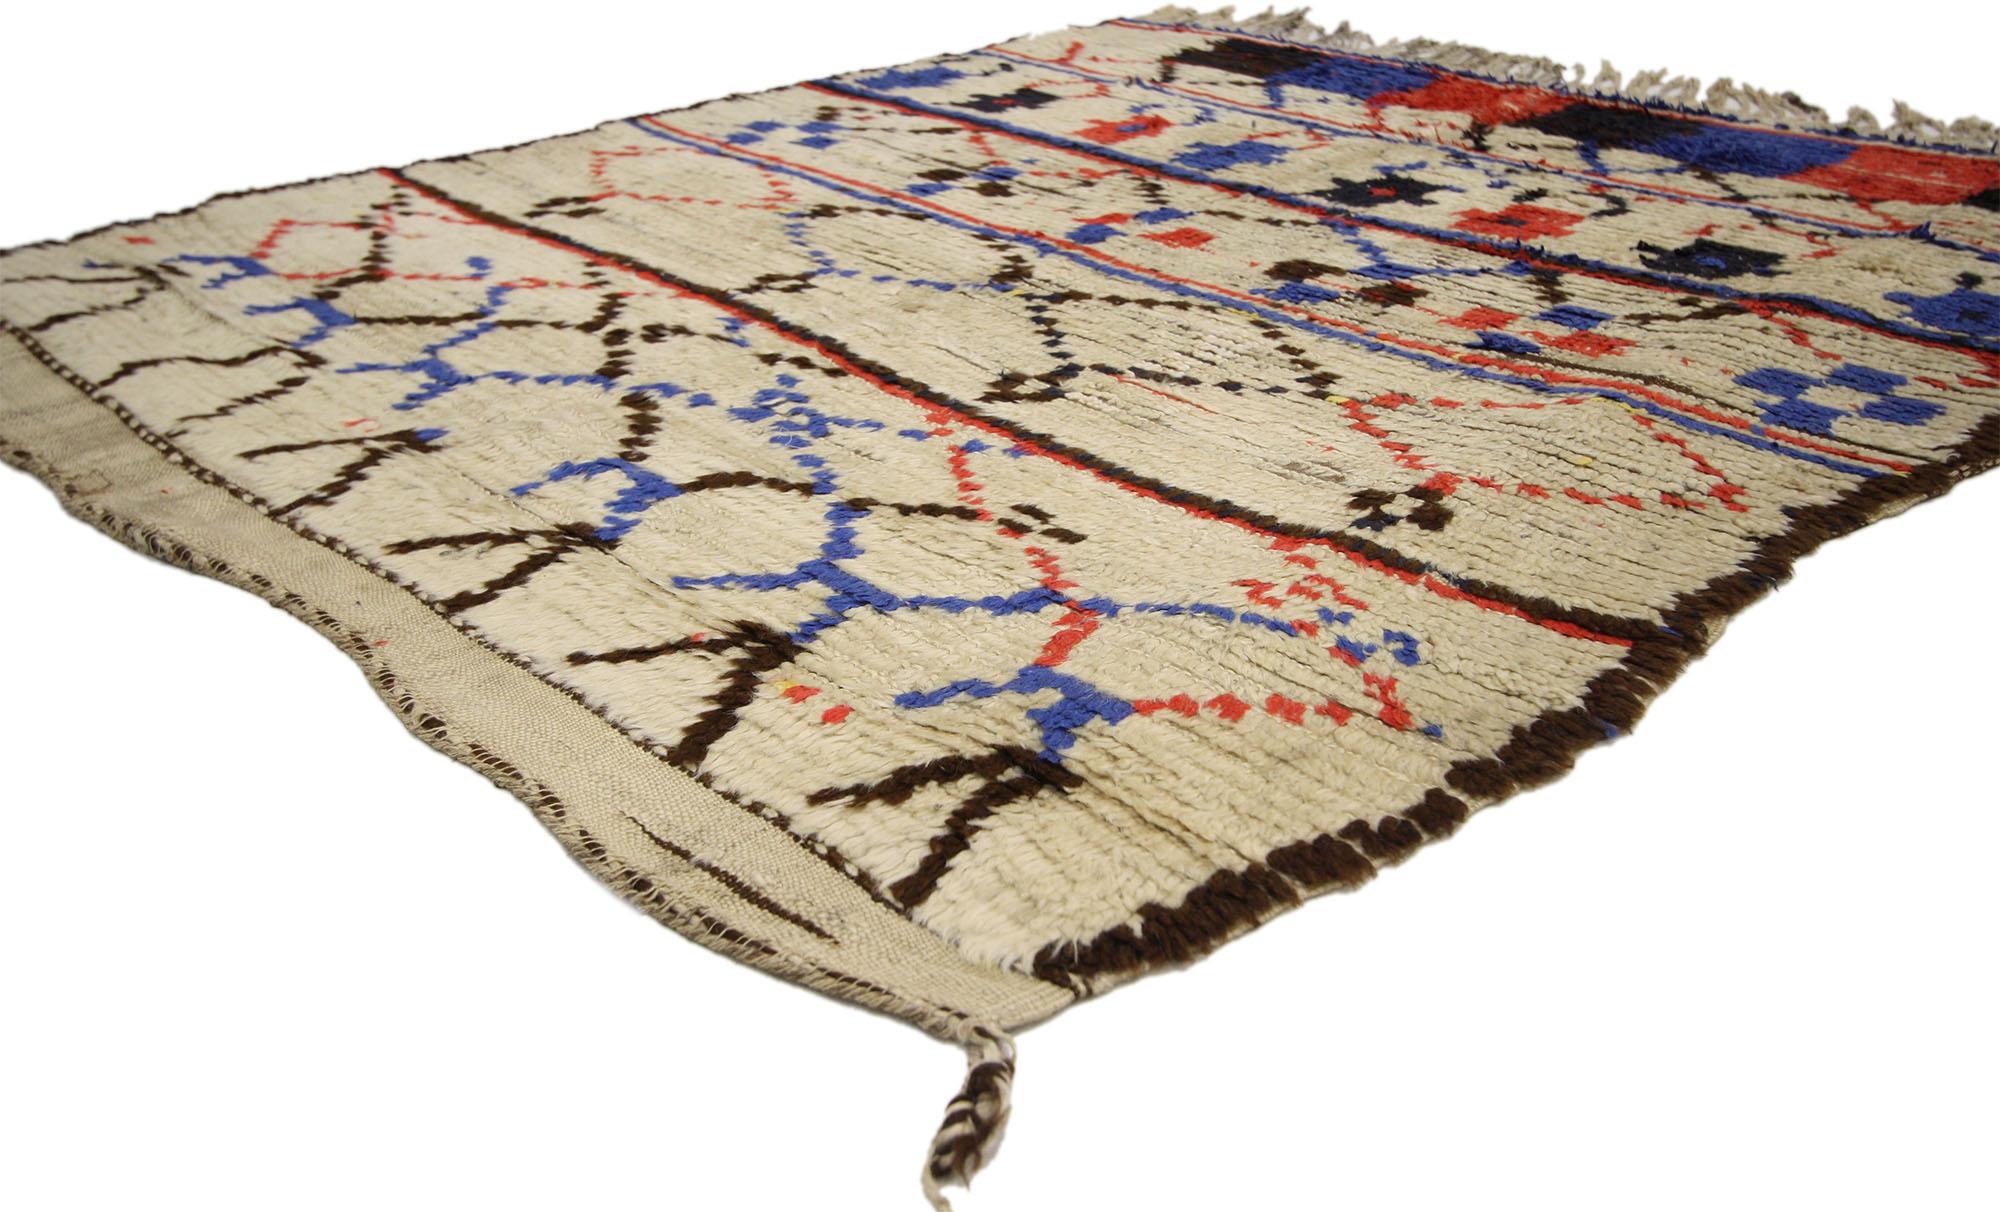 74548, vintage Berber Moroccan Azilal rug with tribal style. The hand knotted wool vintage Berber Moroccan rug is primarily ornamented by an array symbolic Berber Tribe motifs from V-shapes, X-shapes and rods to diamonds, Baraka, chevron, zigzag